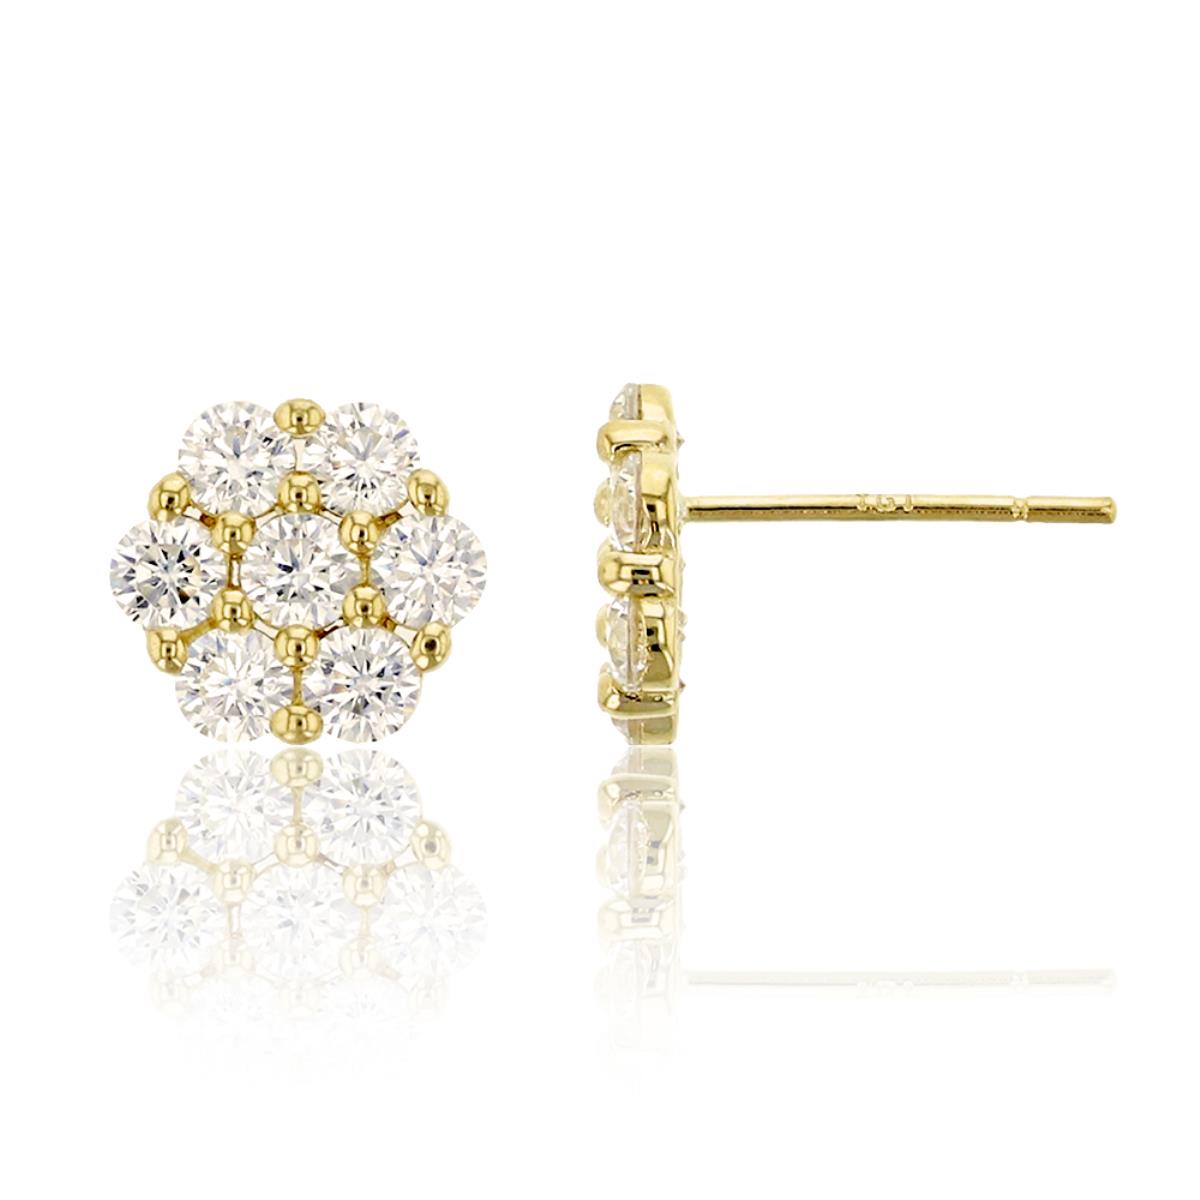 14K Yellow Gold Pave 8mm Cluster CZ Stud Earring